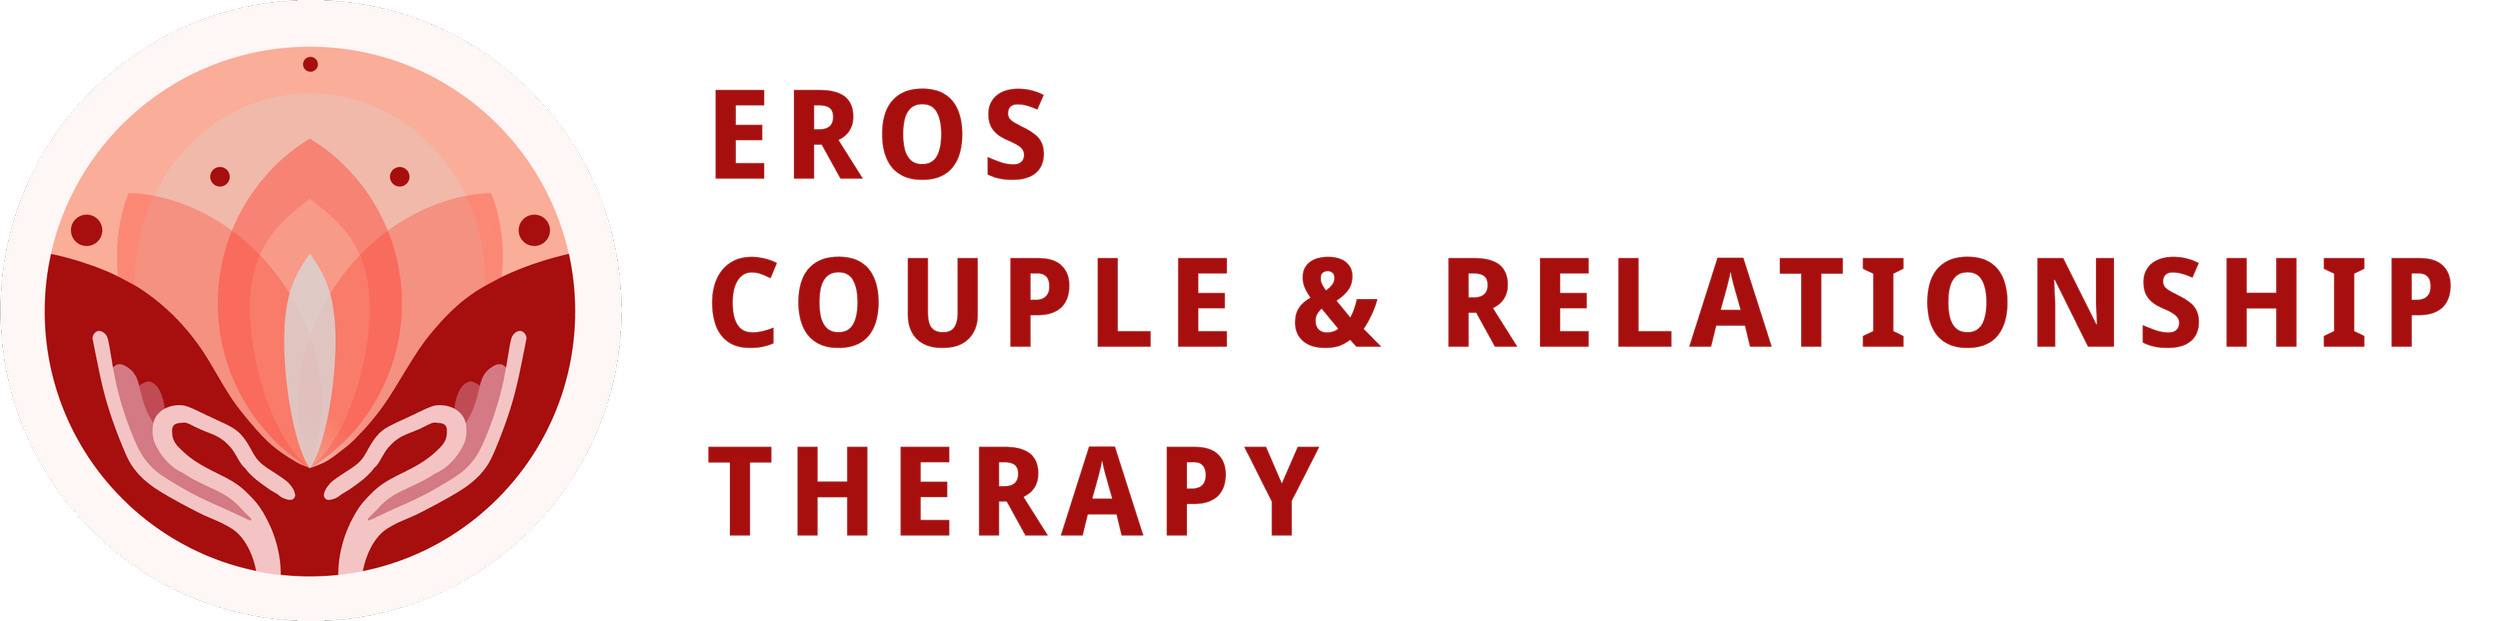 Eros Couple &amp; Relationship Therapy | Law May